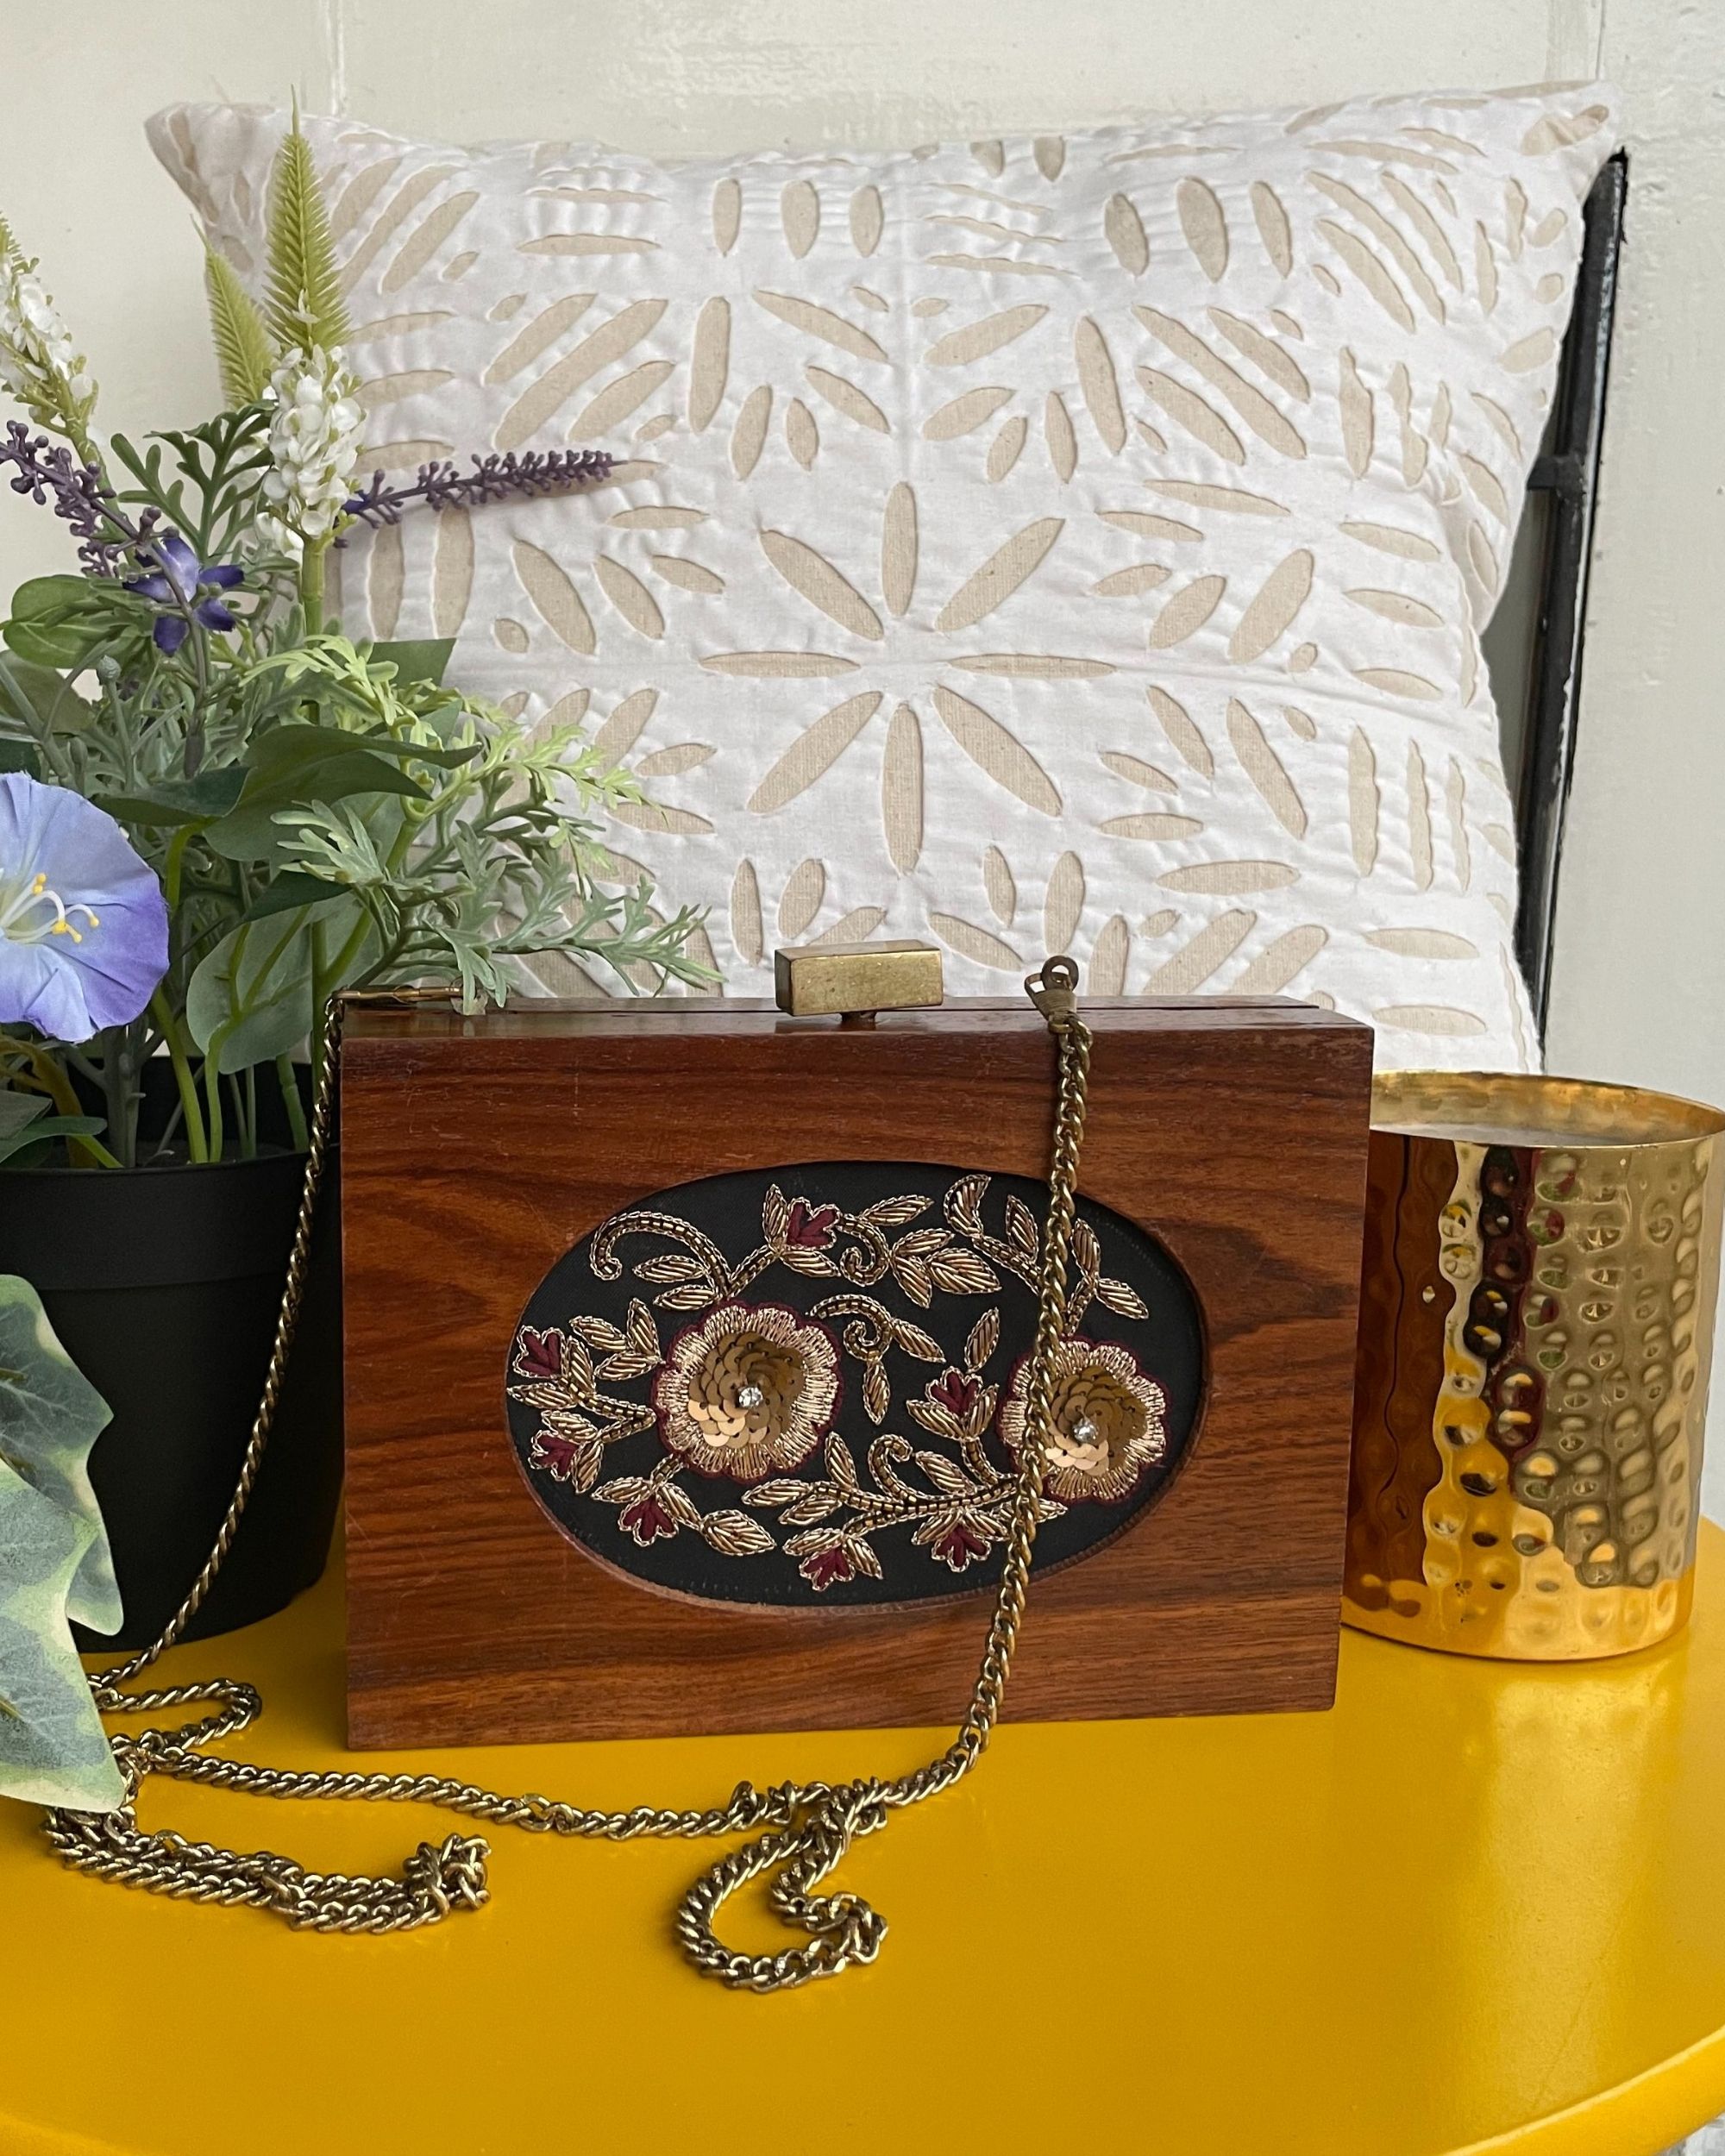 Golden sequins embroidered wooden clutch with chain strap